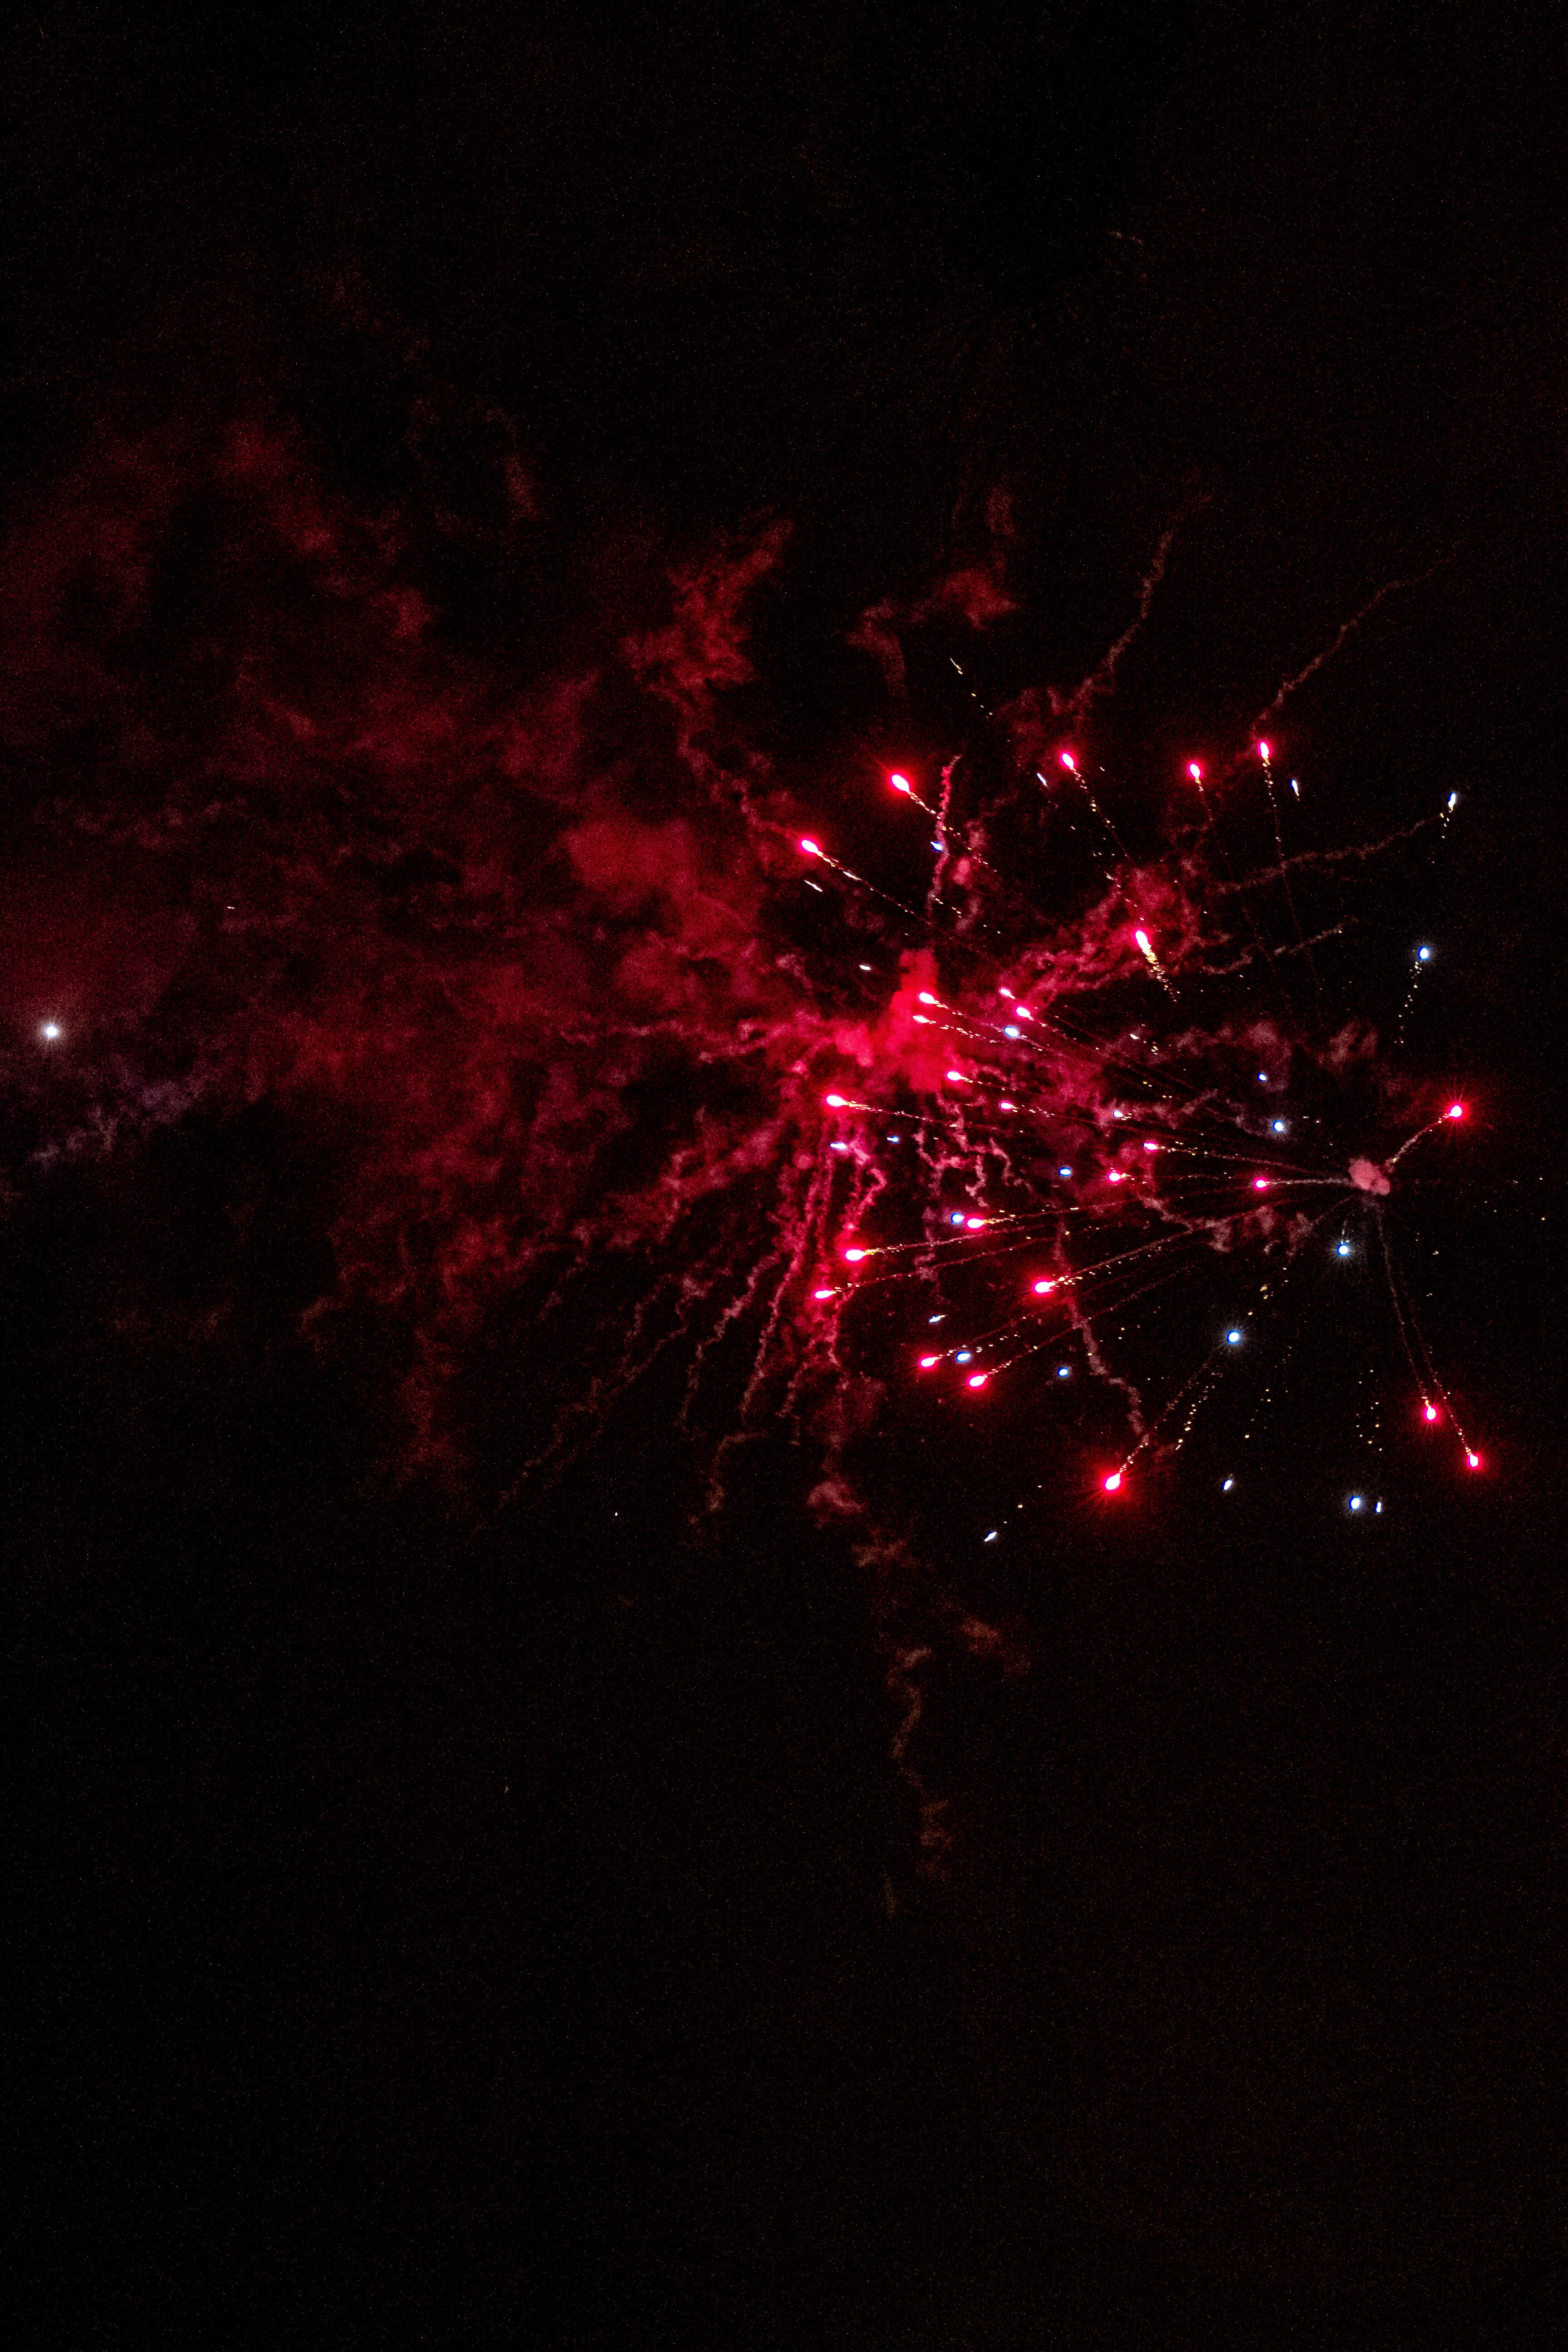 151946 download wallpaper dark, holidays, smoke, night, red, sparks, fireworks, firework screensavers and pictures for free